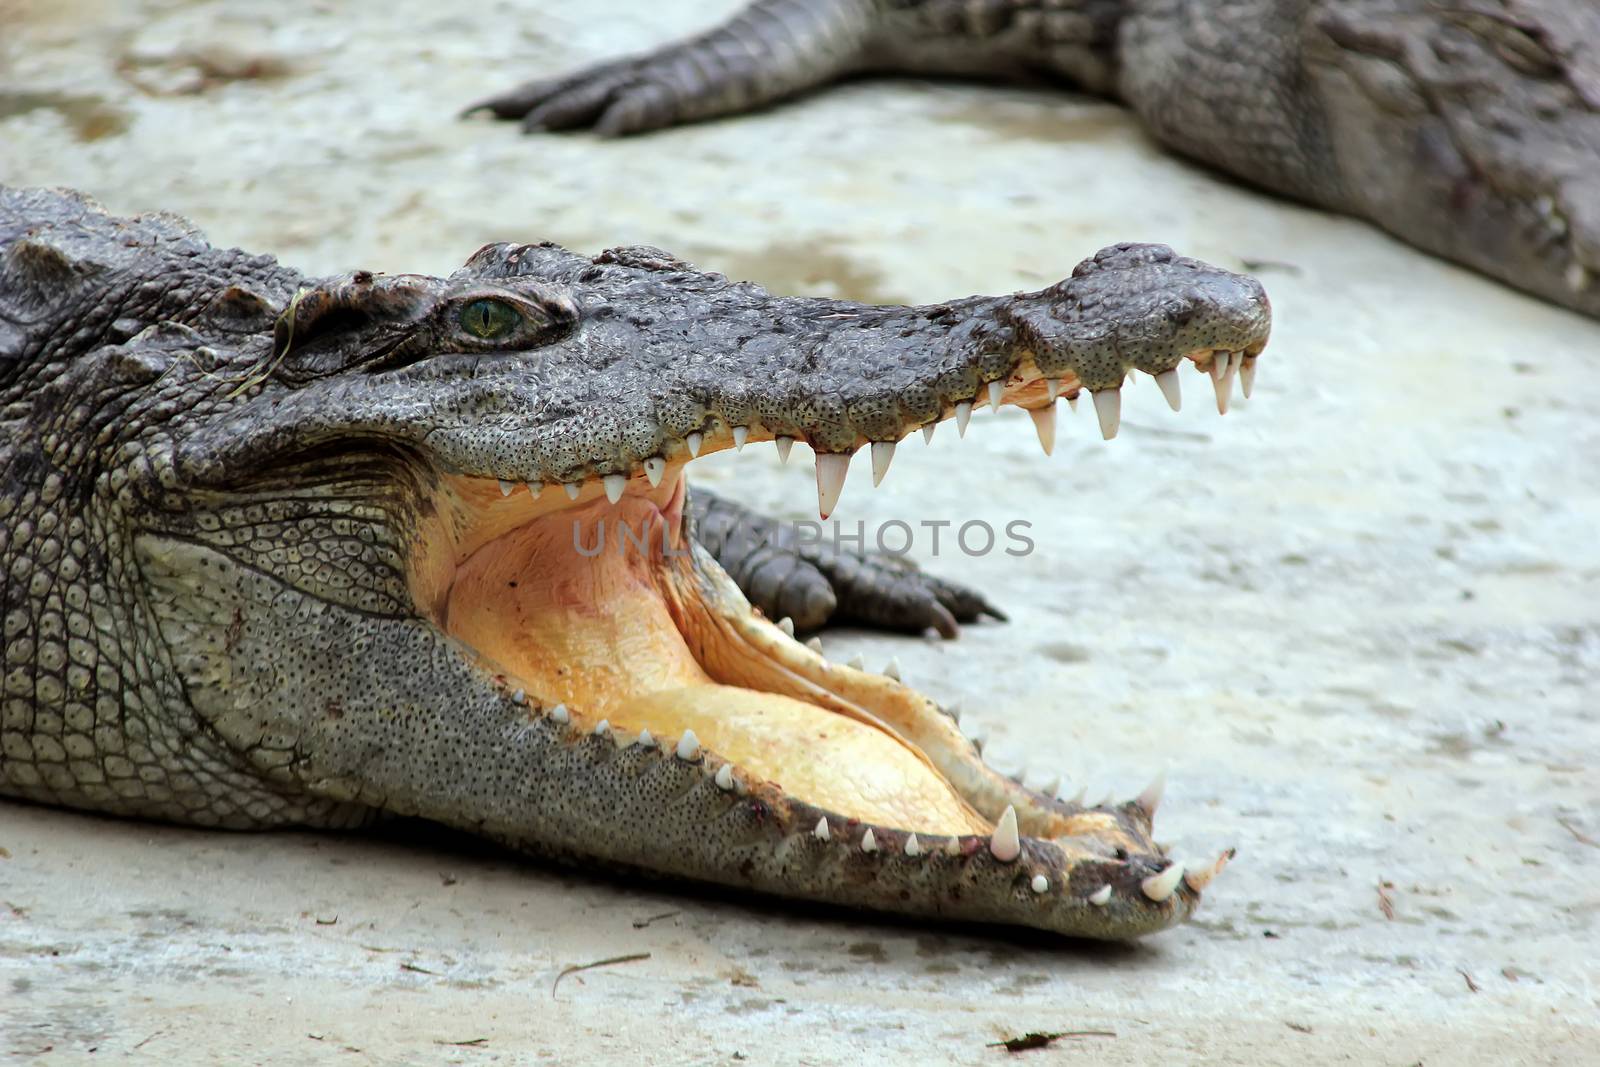 The head of a crocodile with its mouth wide open, blood on its teeth.